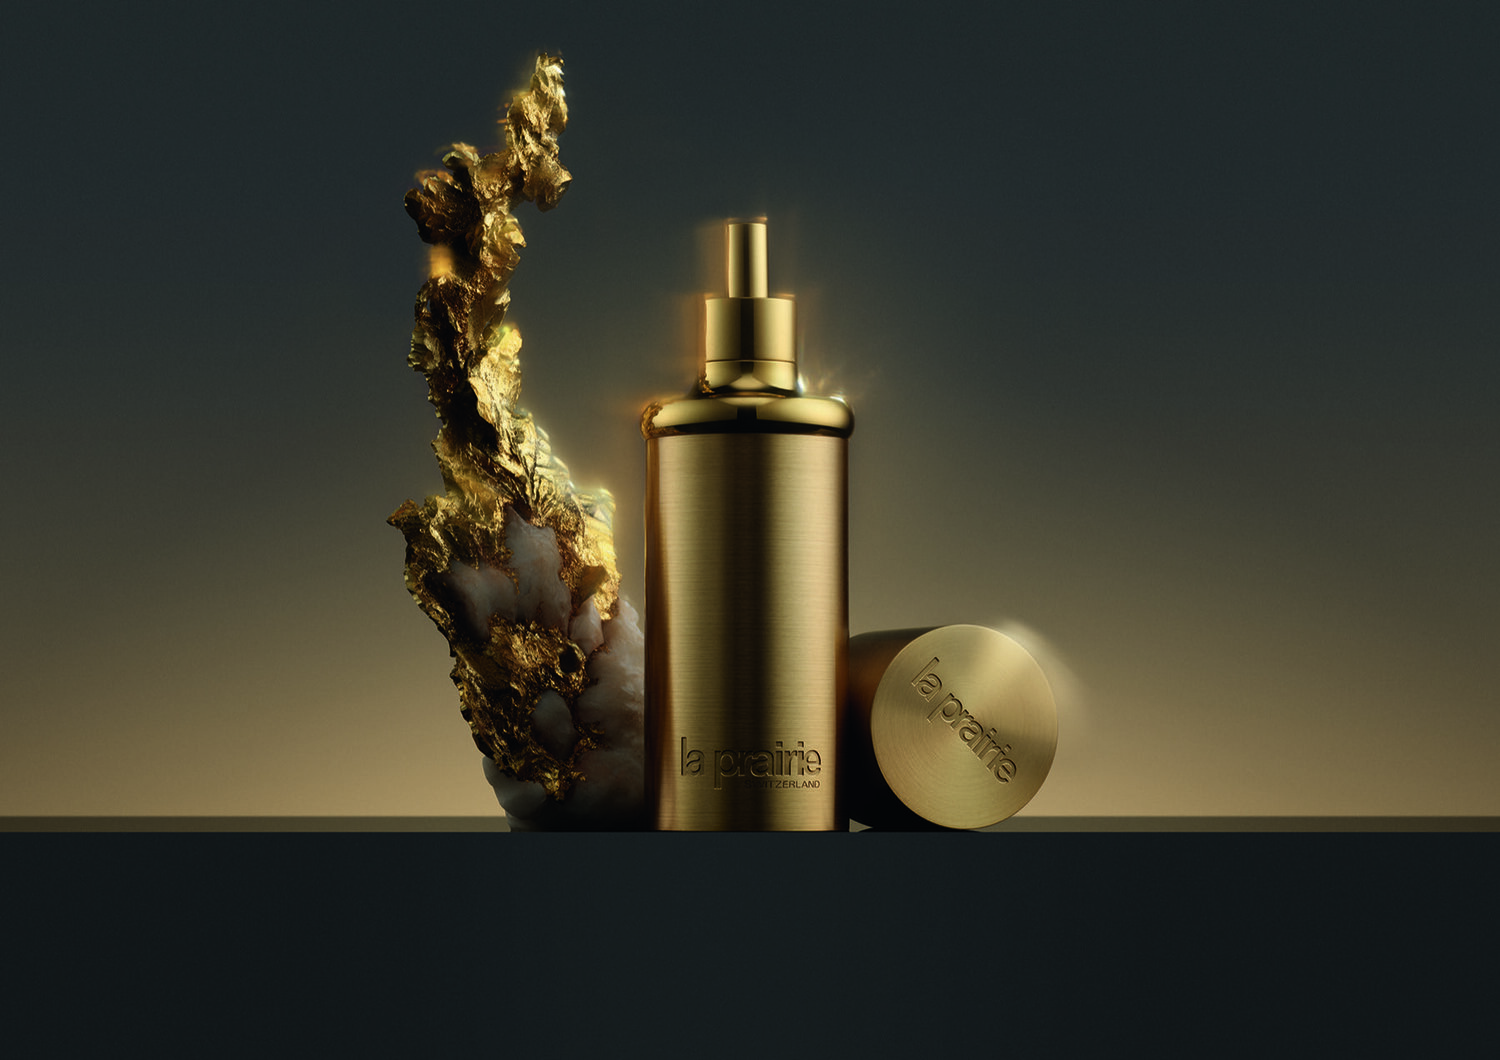 Introducing La Prairie’s Pure Gold Collection